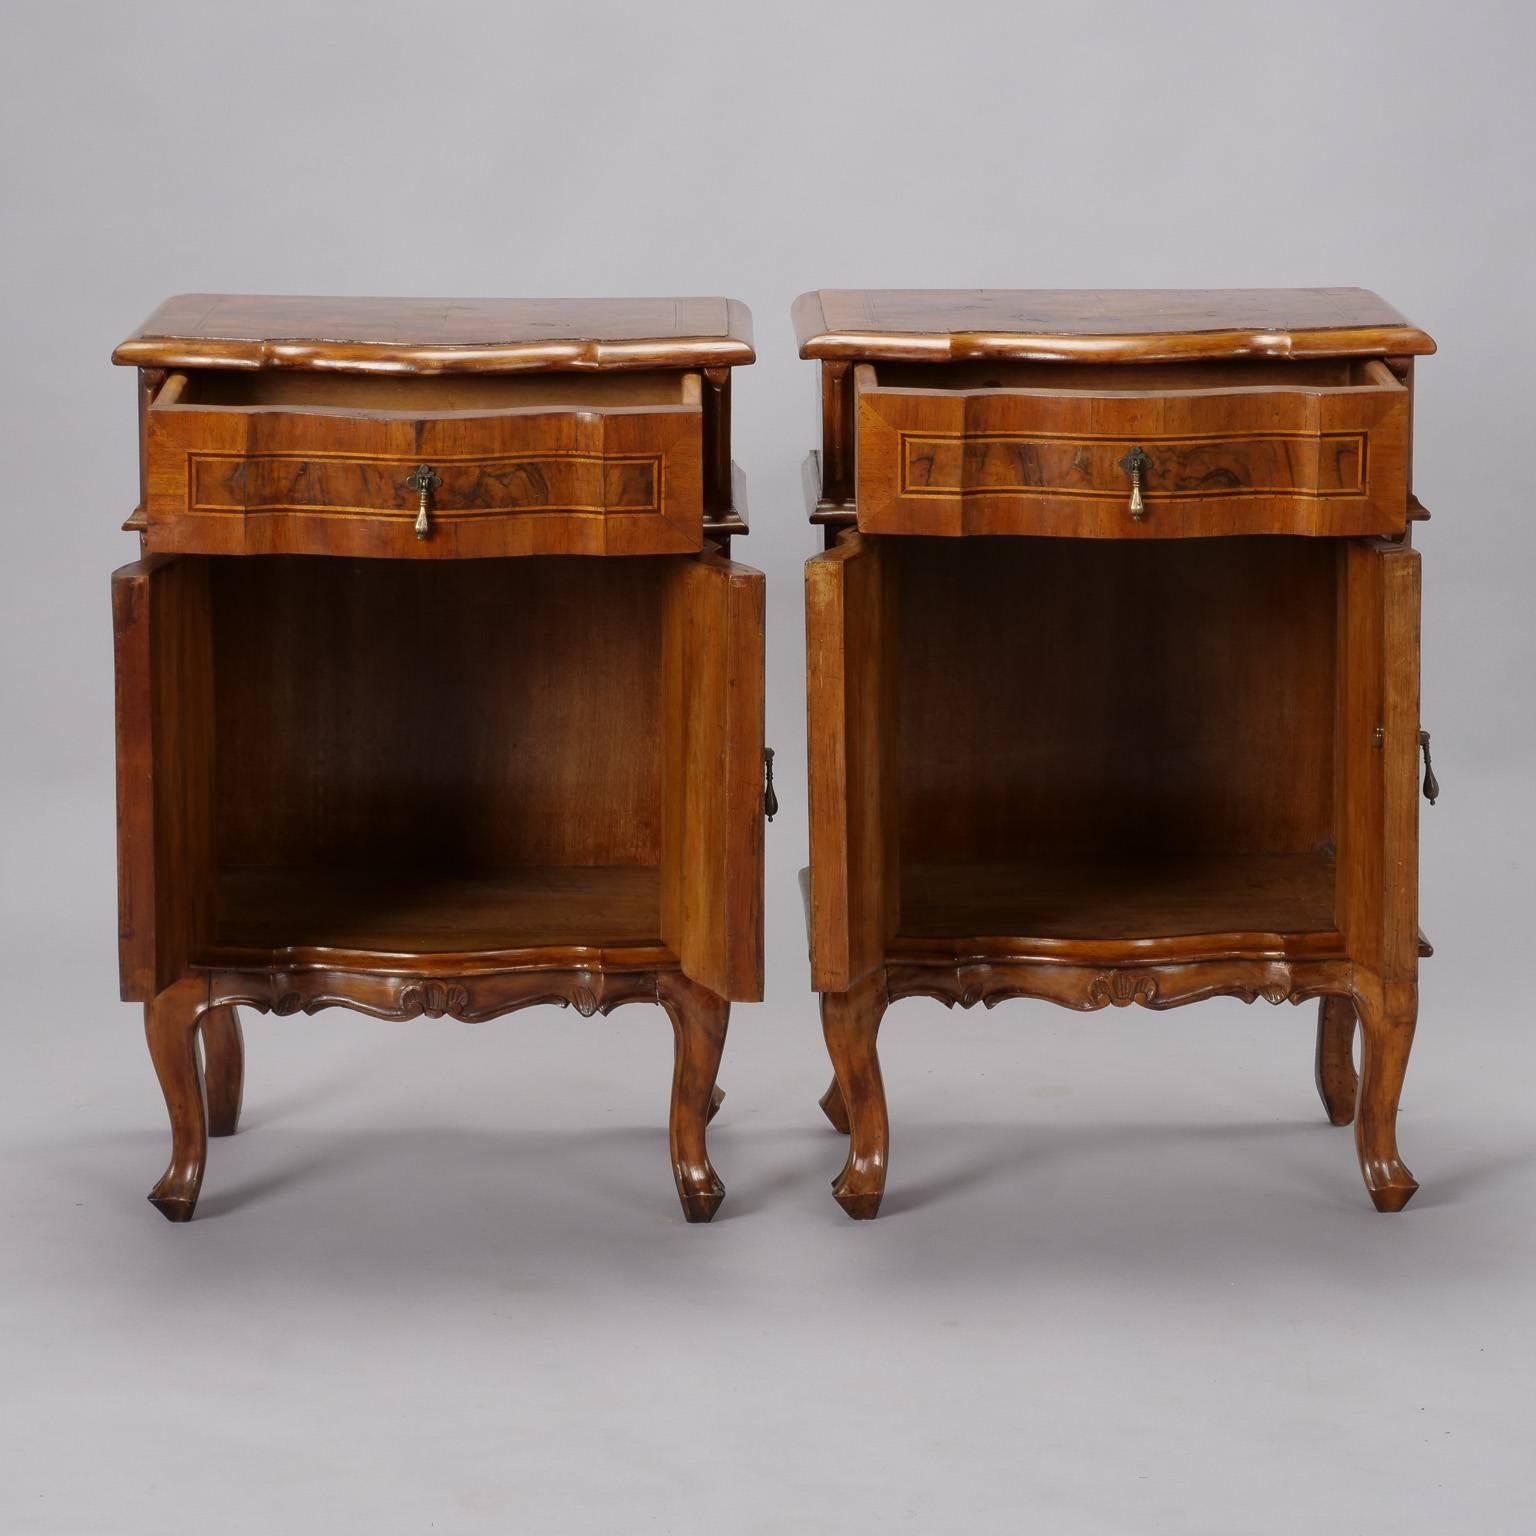 Pair of Italian side cabinets with cabriole legs, single top drawer and lower cabinet with hinged doors, circa 1920s. Beautifully figured walnut veneer, decorative inlay on door and drawer fronts and carved details on edges and apron. Sold and